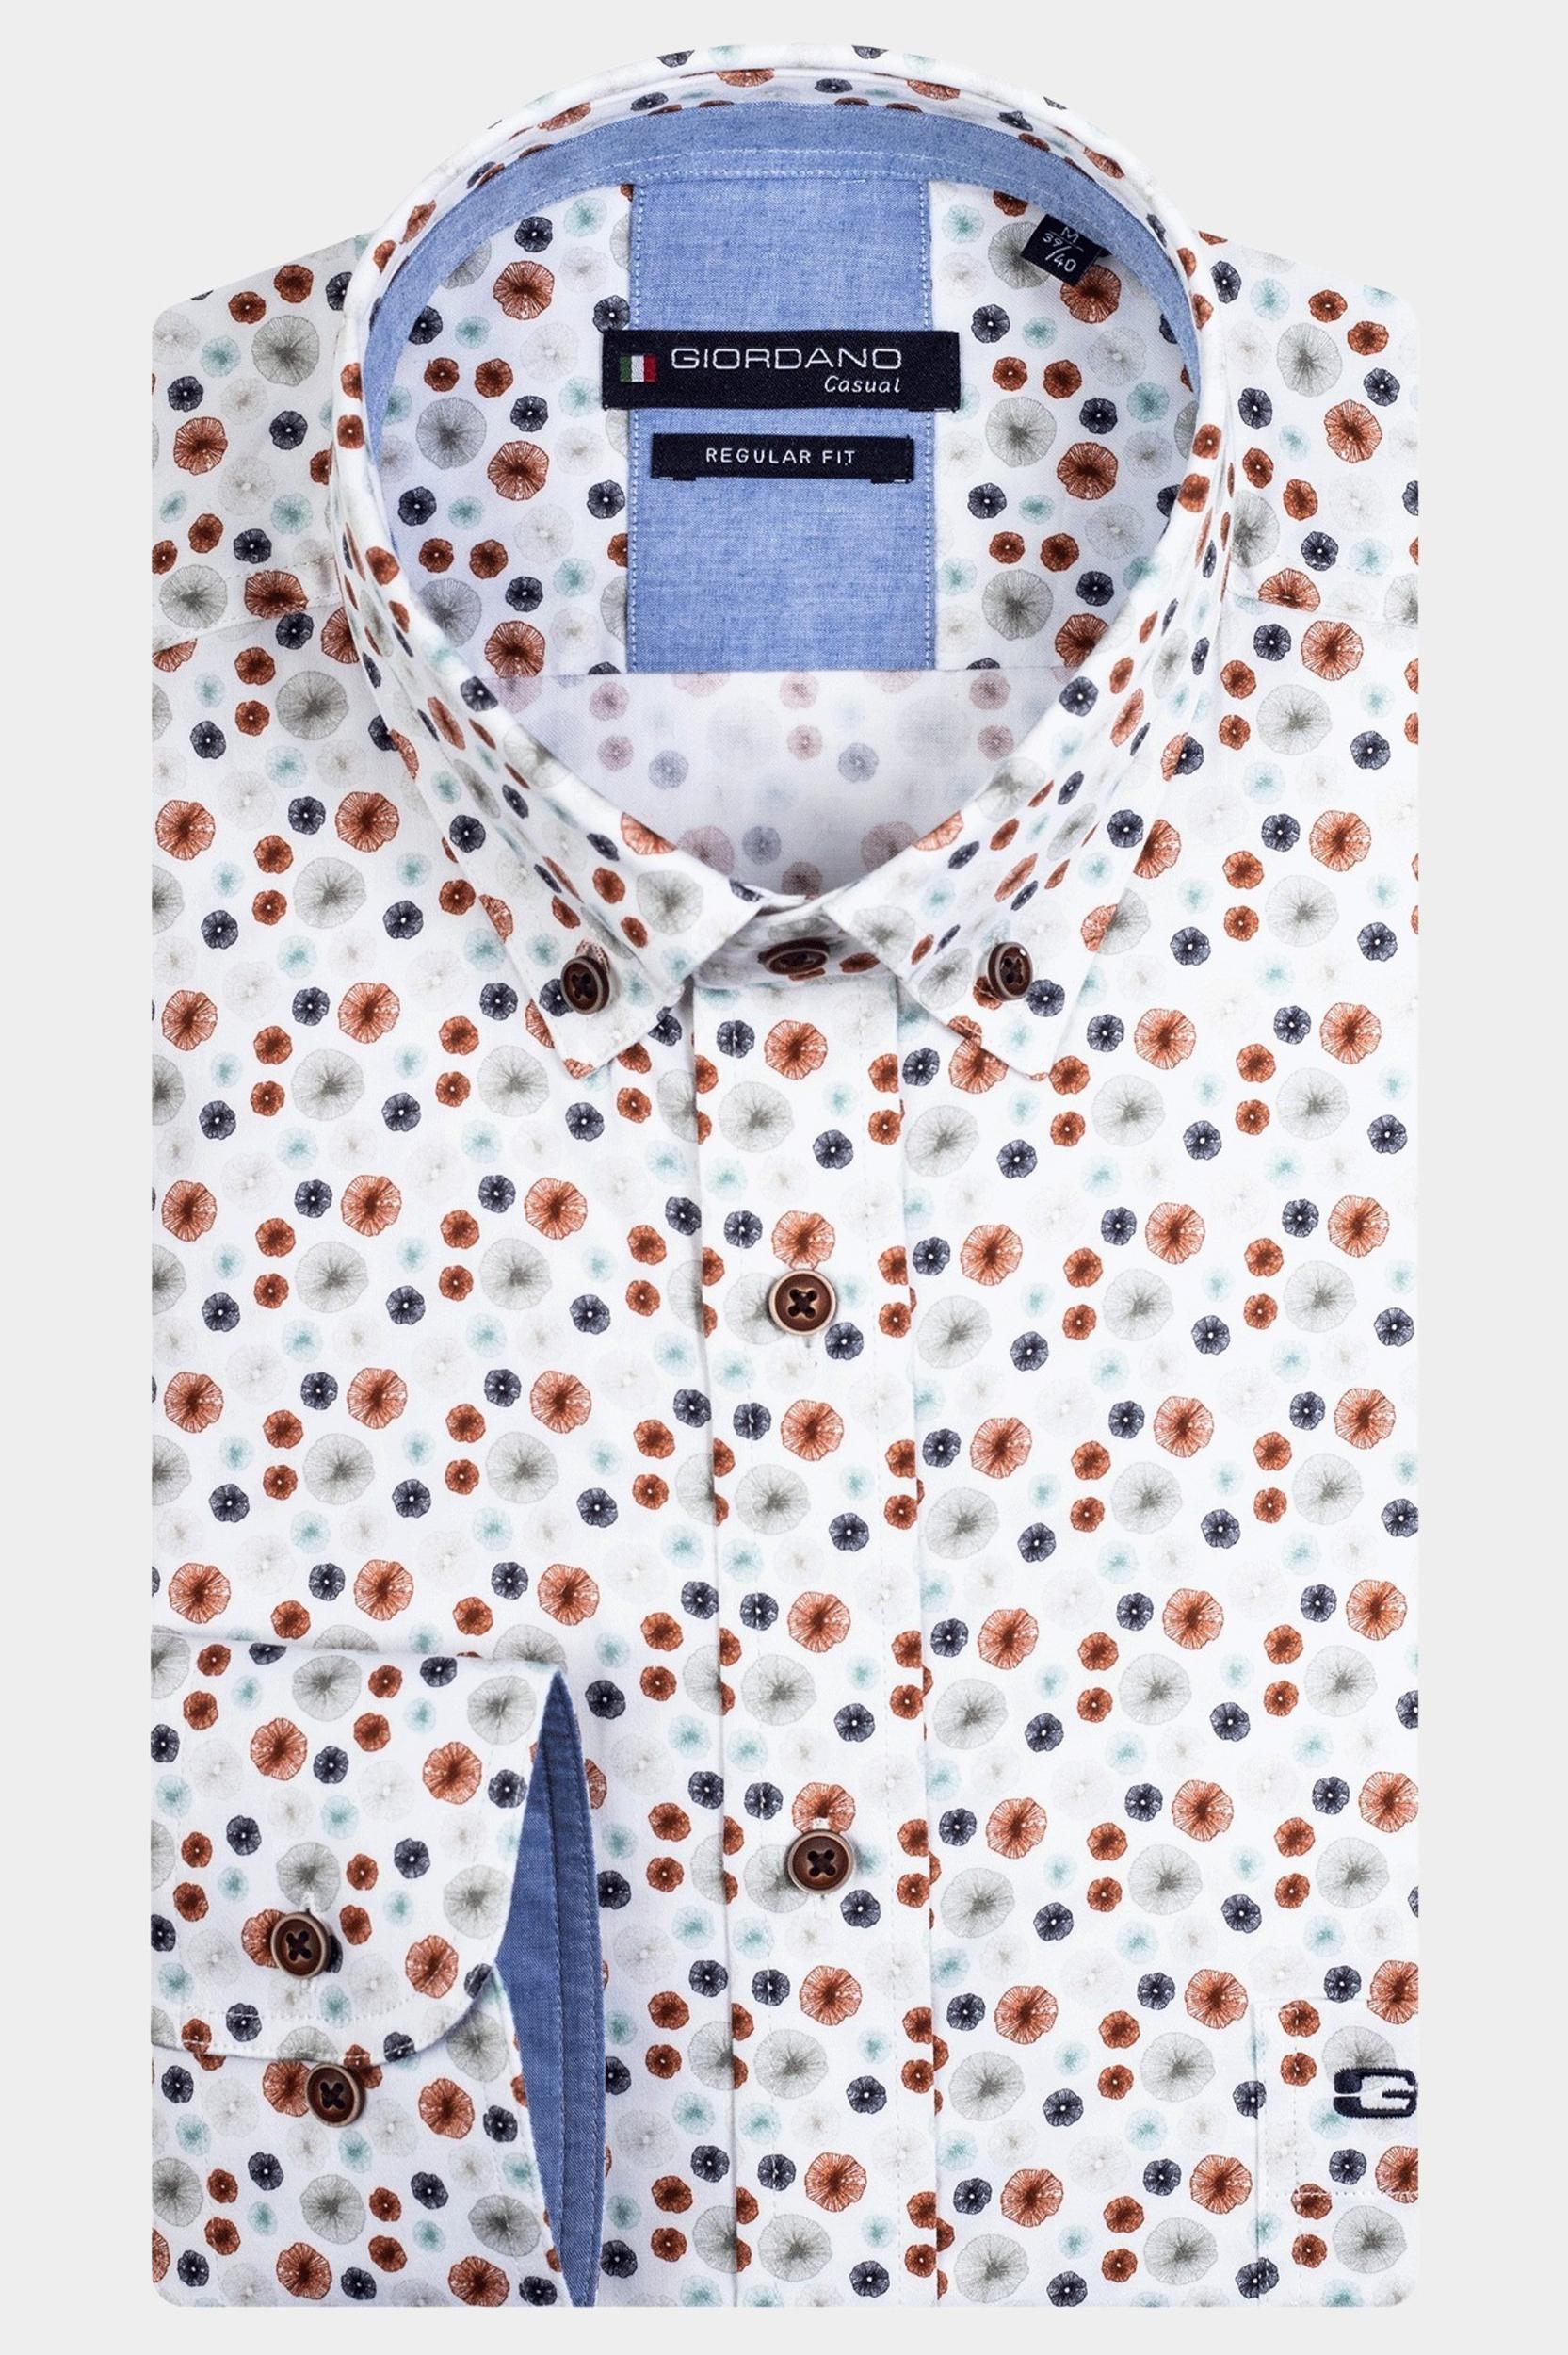 Giordano Casual hemd lange mouw Bruin Ivy Coral Print 417021/80